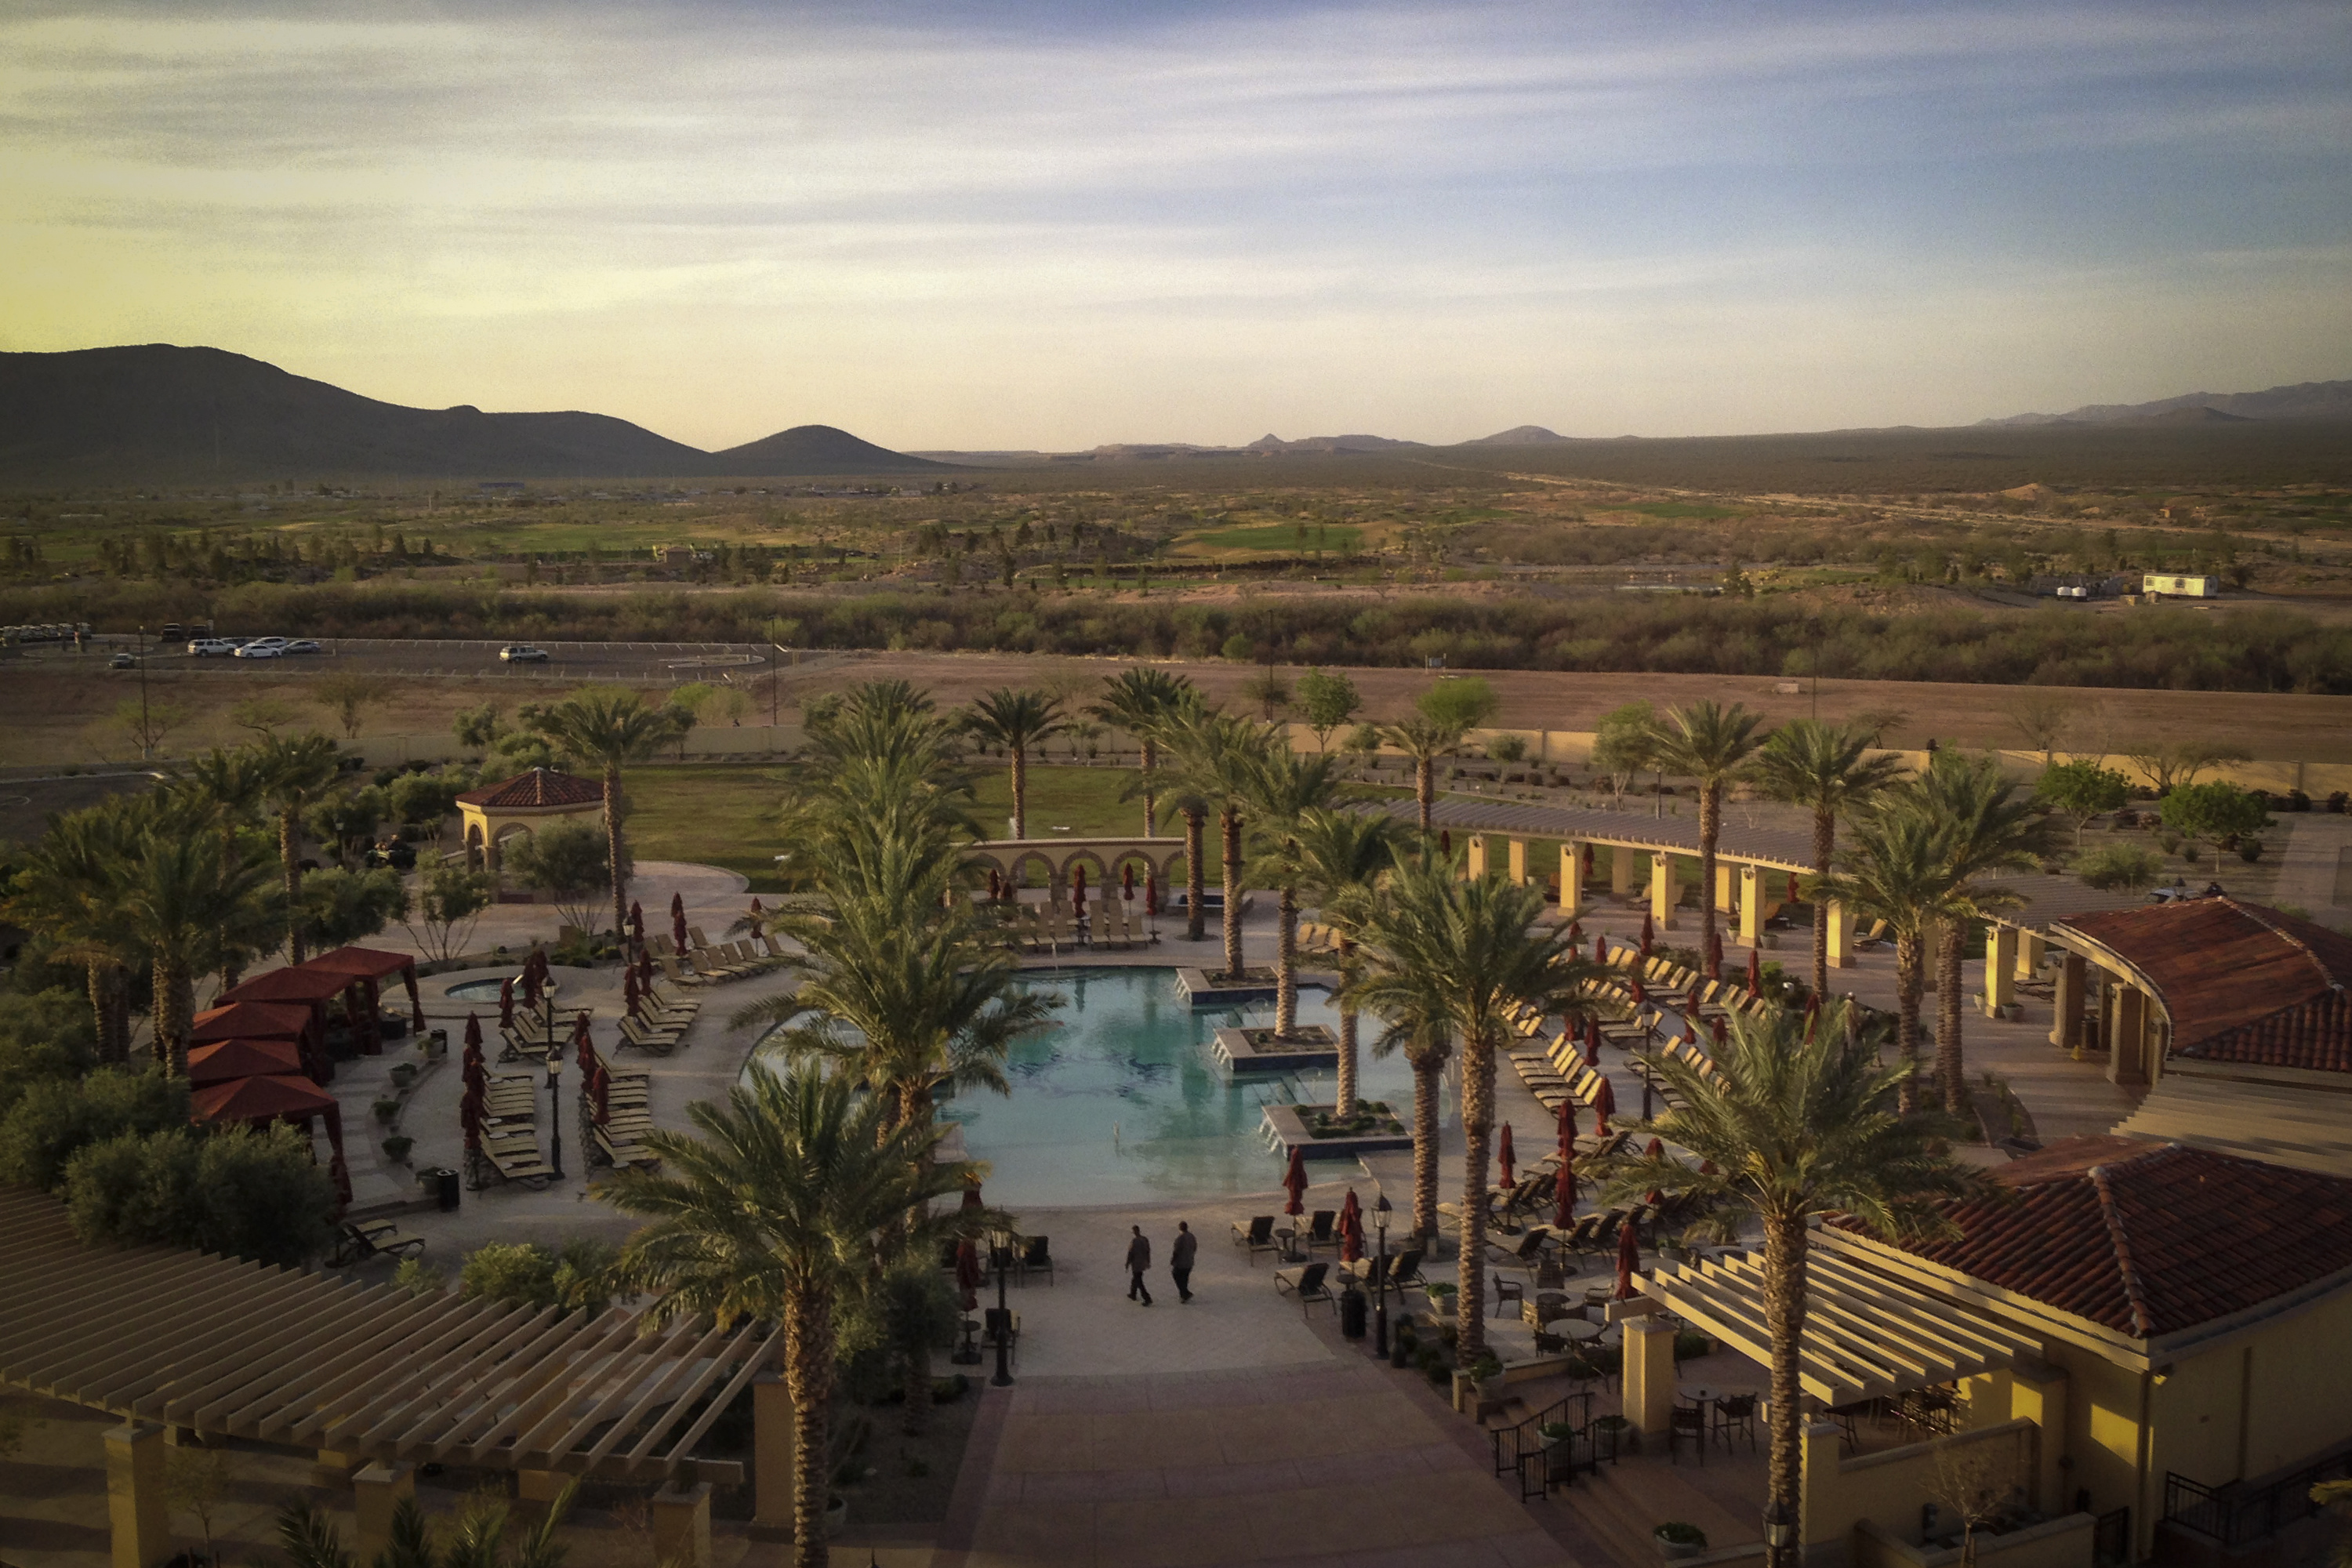 The grounds of the Casino Del Sol Hotel, hinting of an oasis, overlooks the poverty stricken residential part of the tribal land on the Pascua Yaqui Indian Reservation, Ariz., March 18, 2014